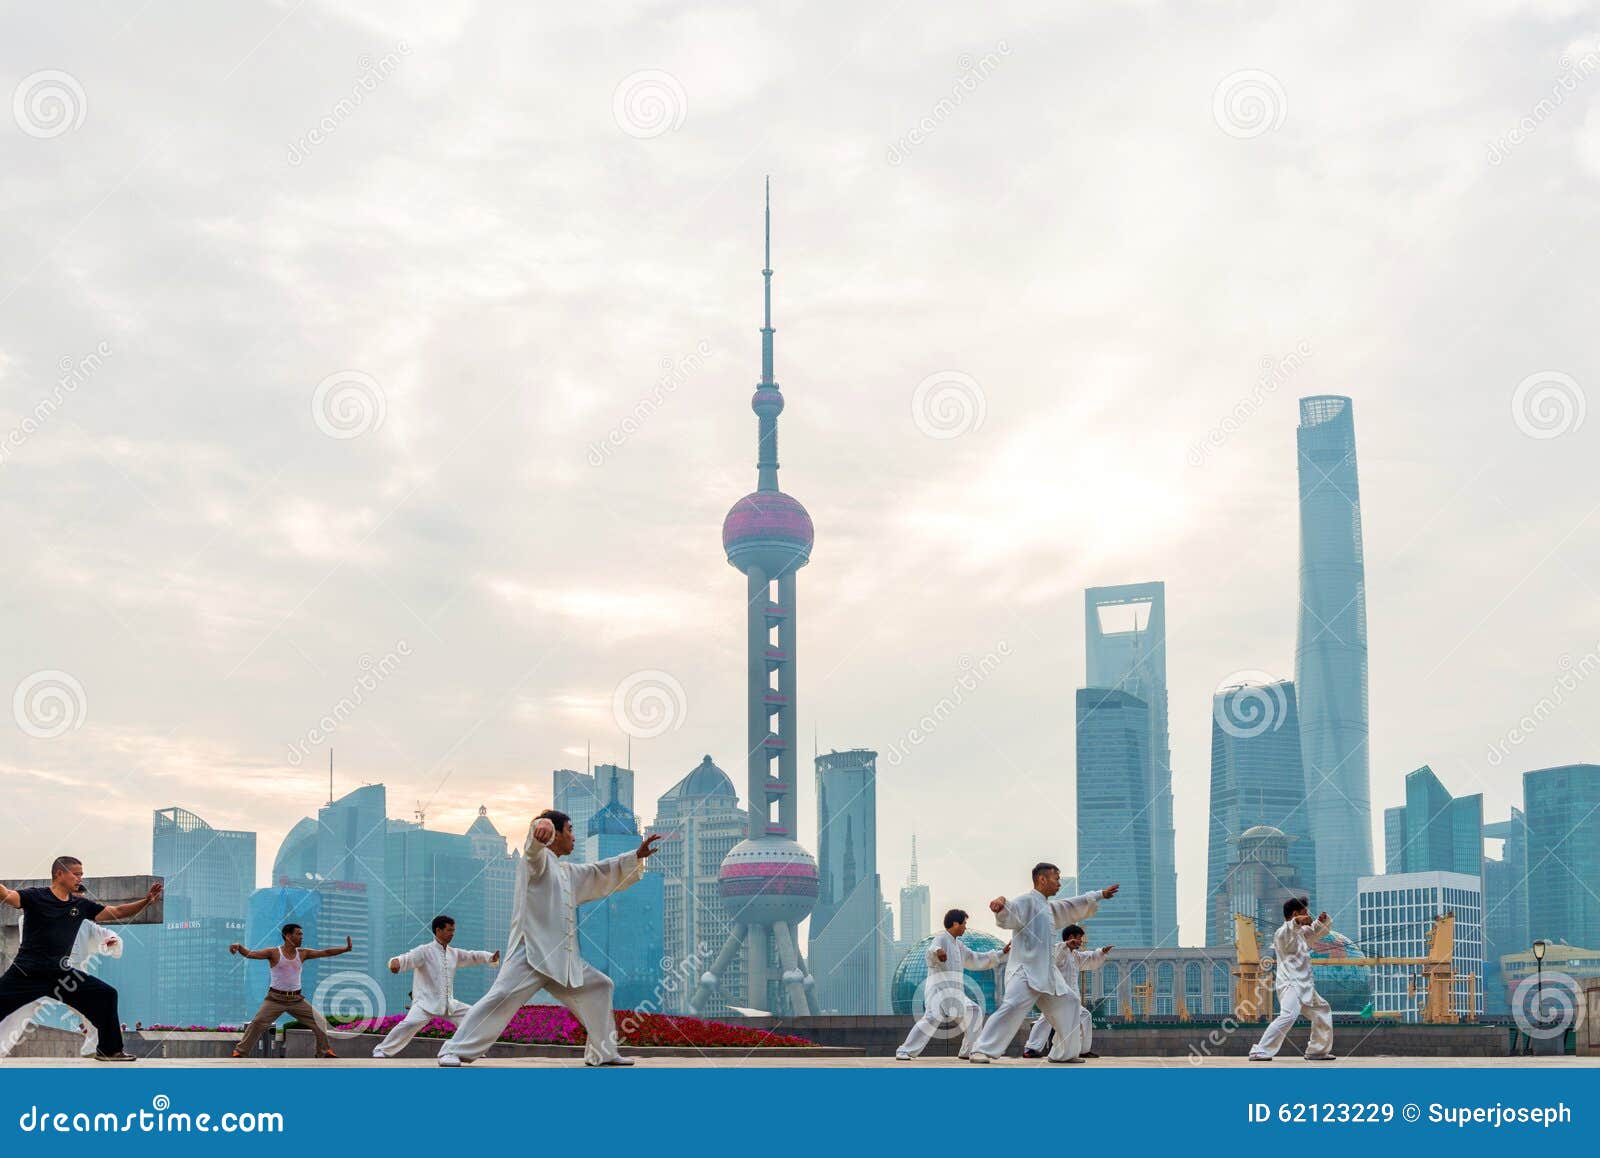 Chinese People in Shanghai Bund To Play Tai Chi Editorial Stock Image ...